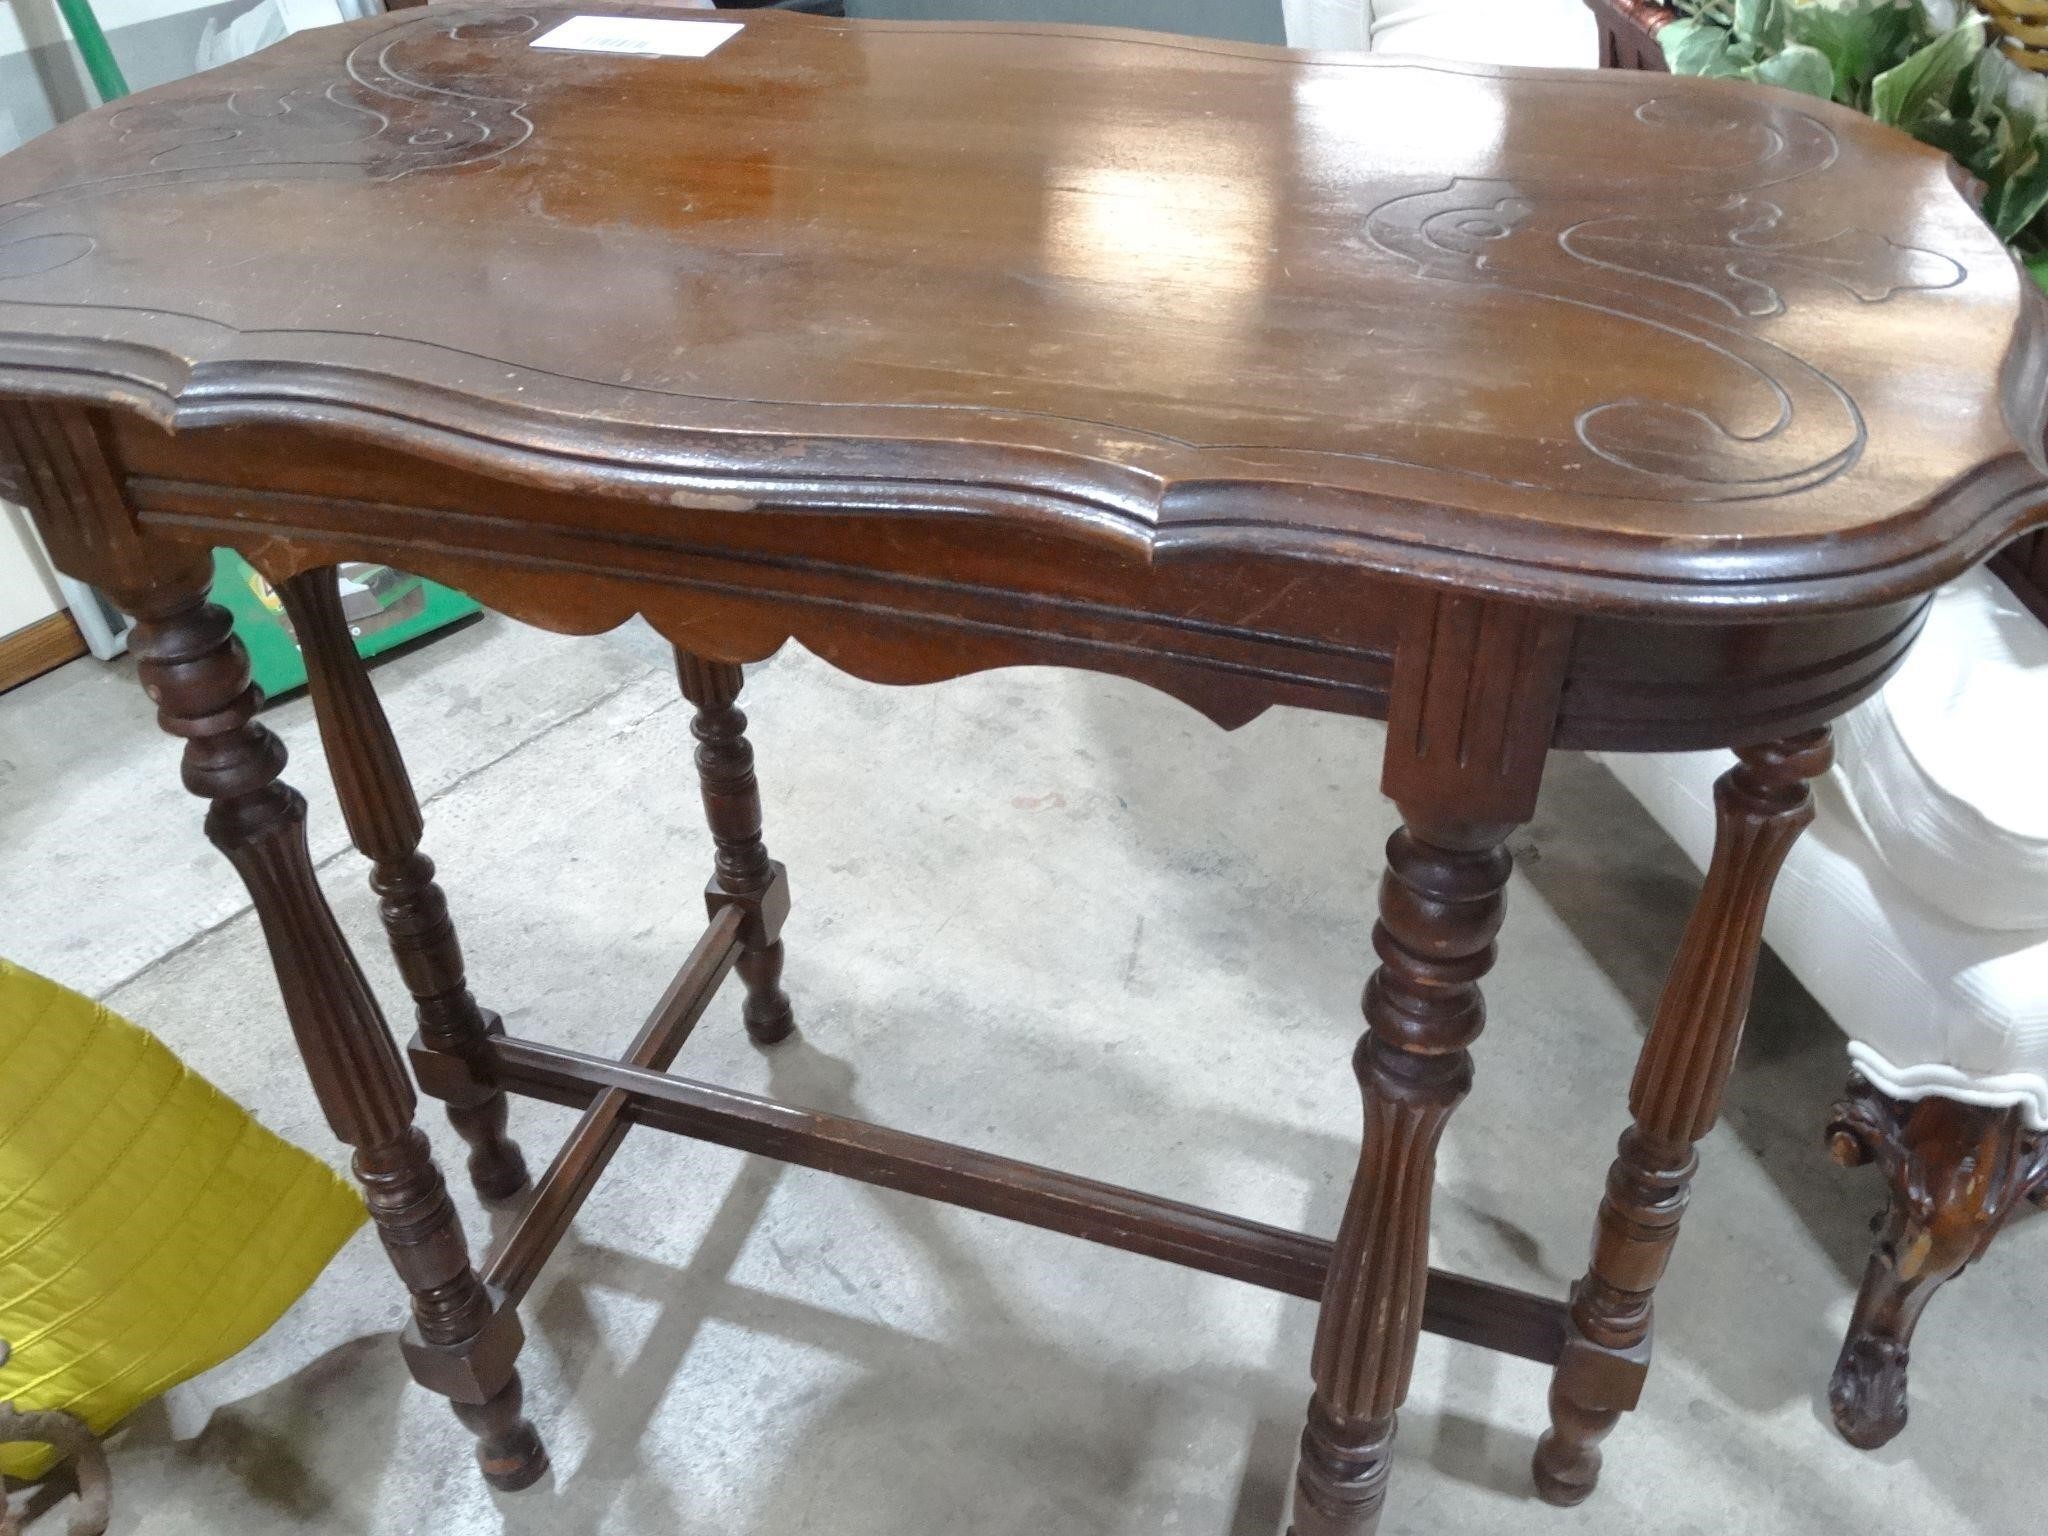 Beautiful Antique wood Serving Table